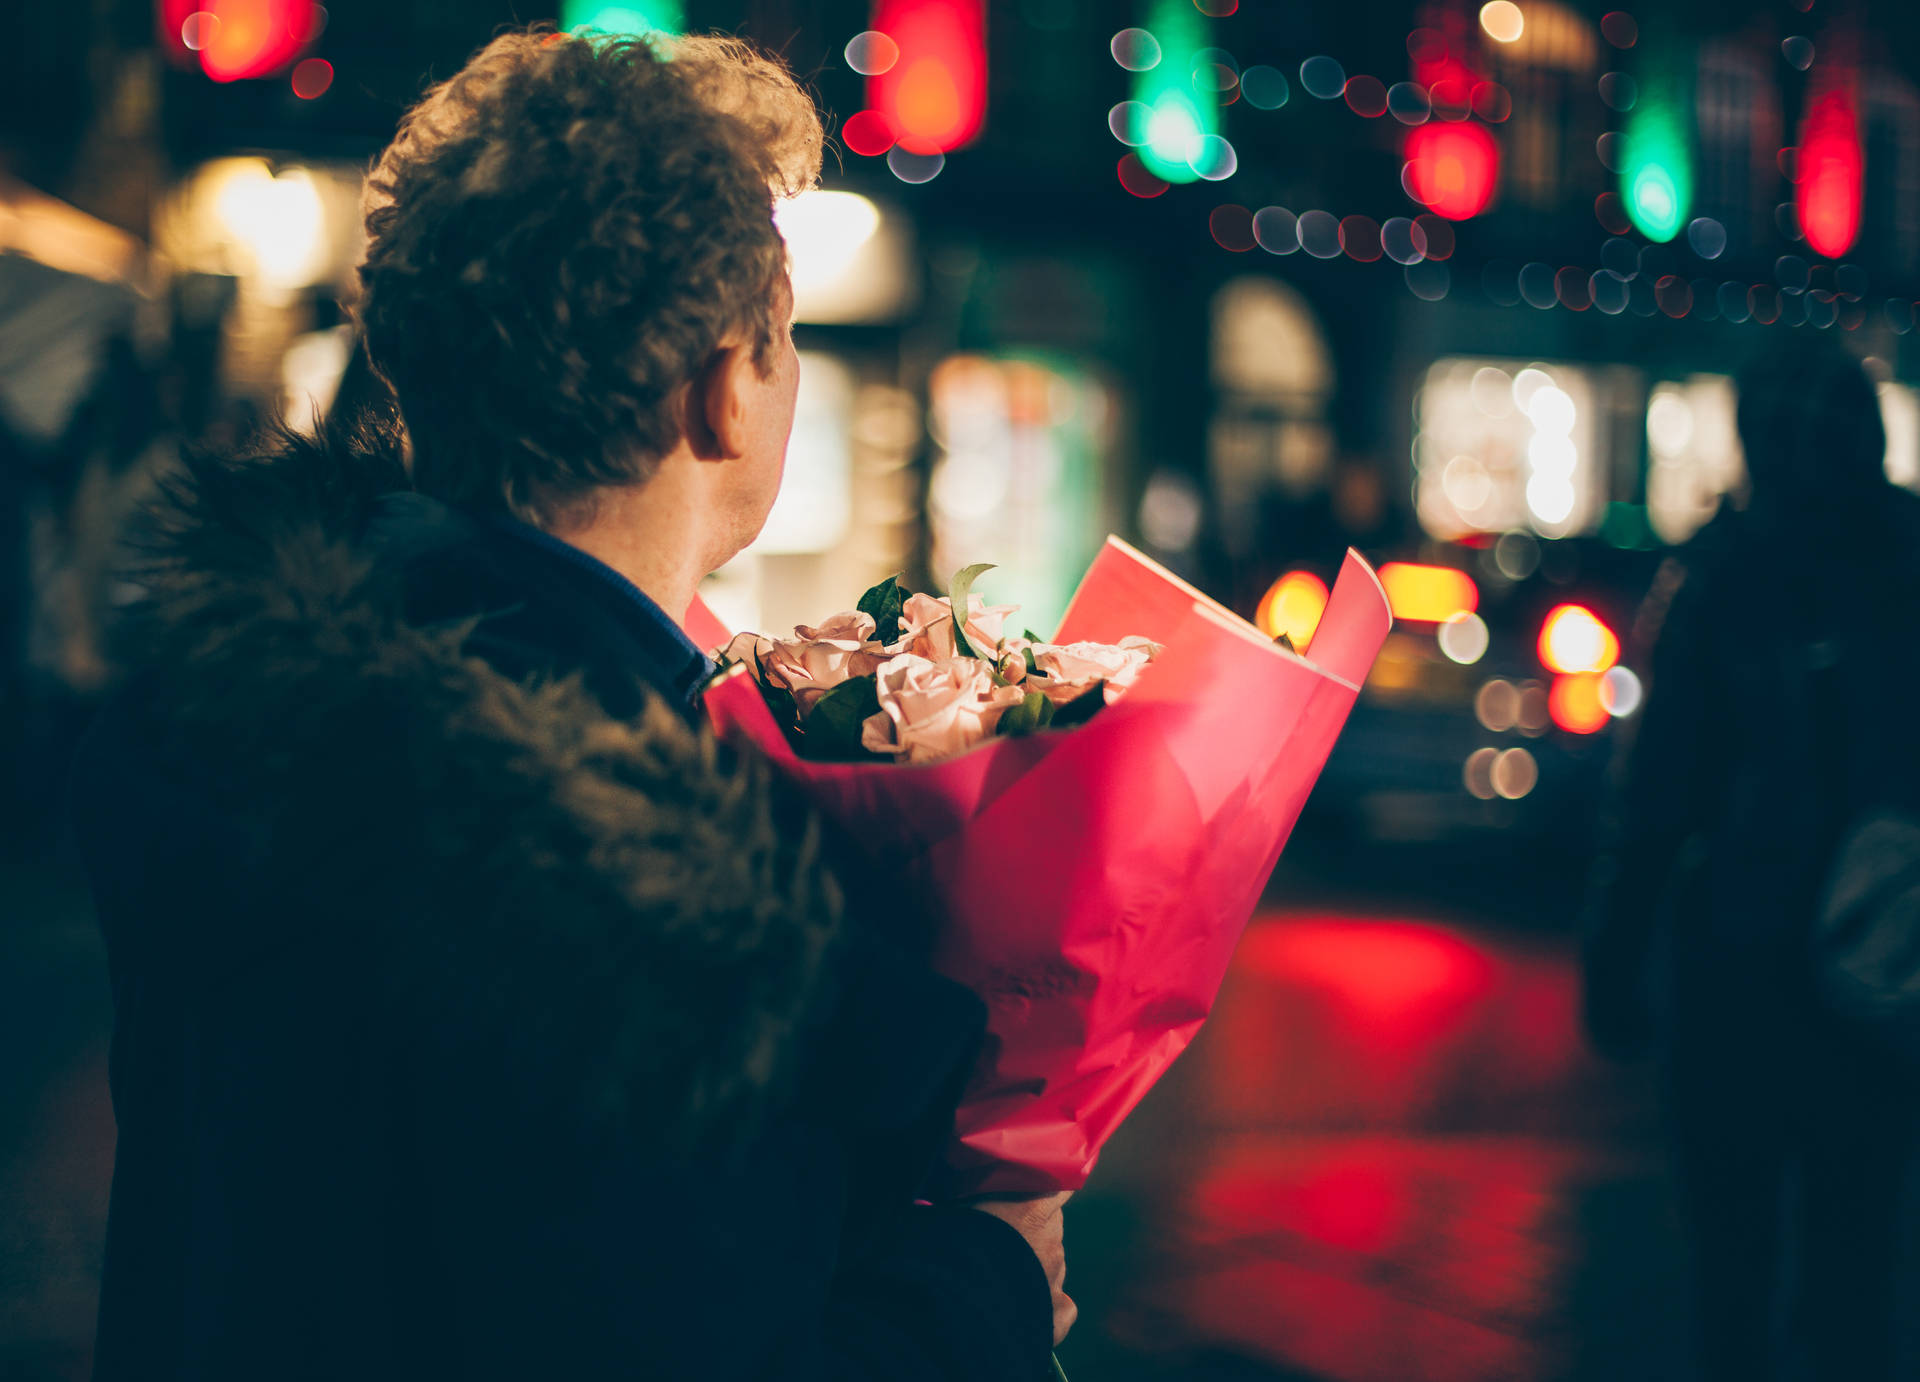 Romantic Love Flowers Man In The City Background